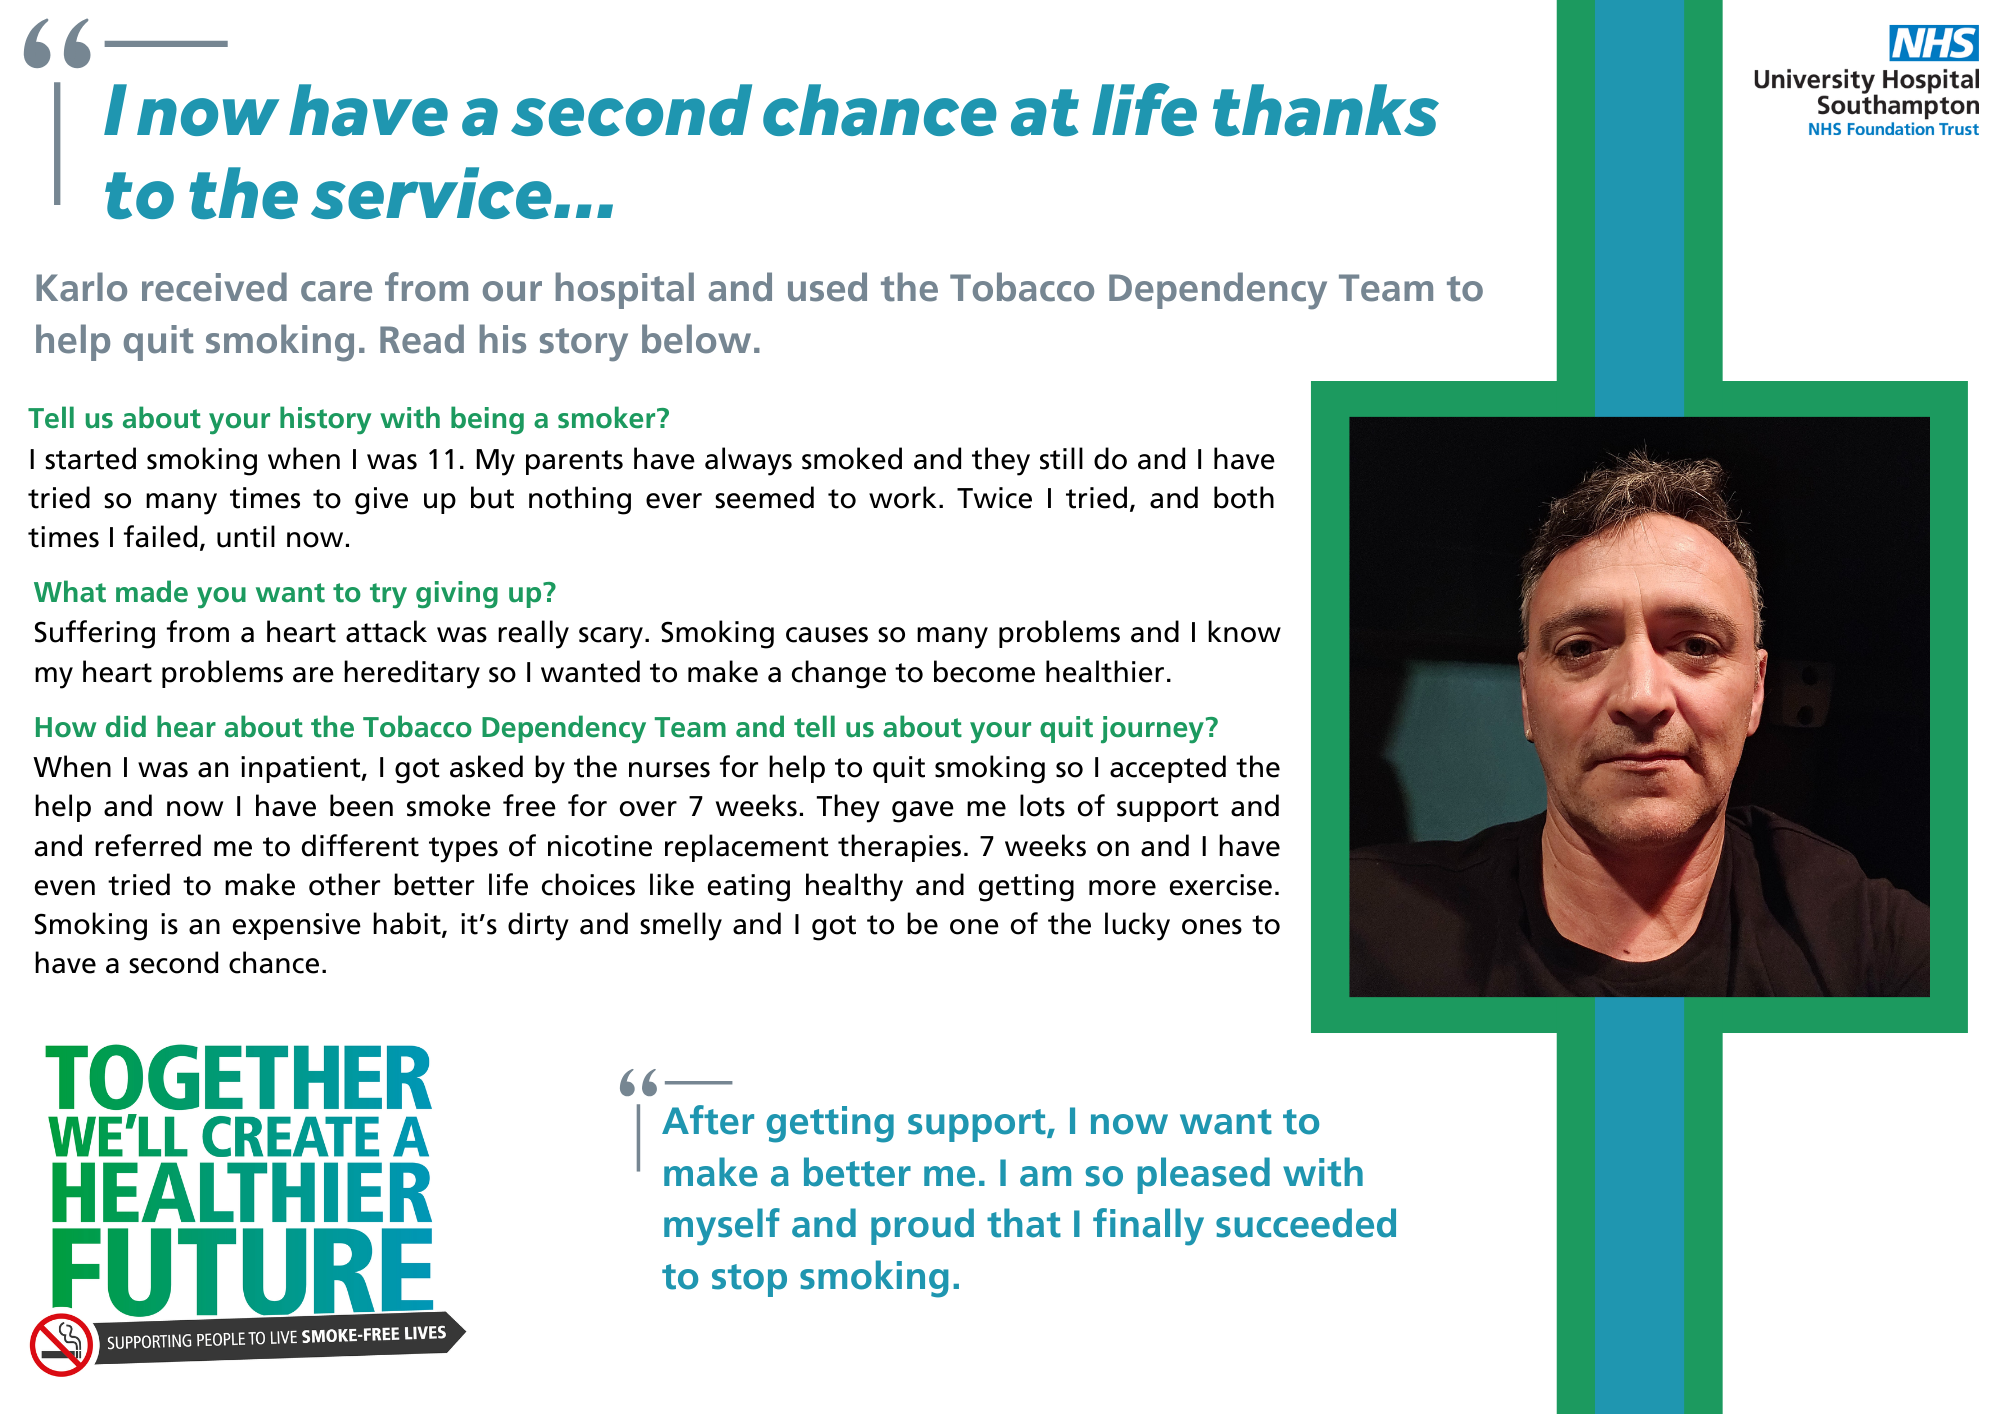 Patient story from Karlo who successfully gave up smoking with the support of our tobacco dependency team.